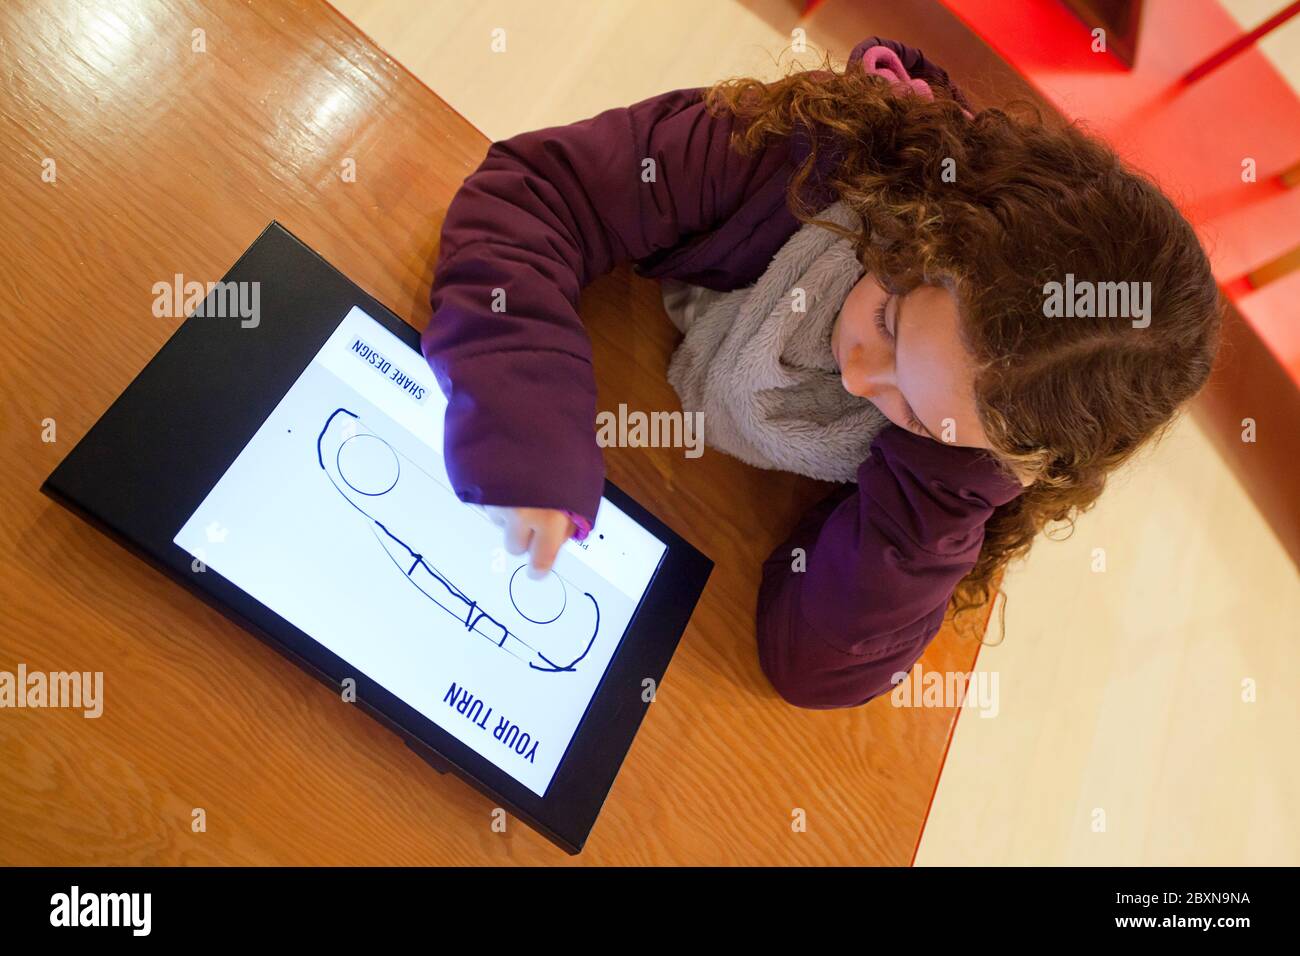 Girl designing car on tablet, The Design Museum, London Stock Photo